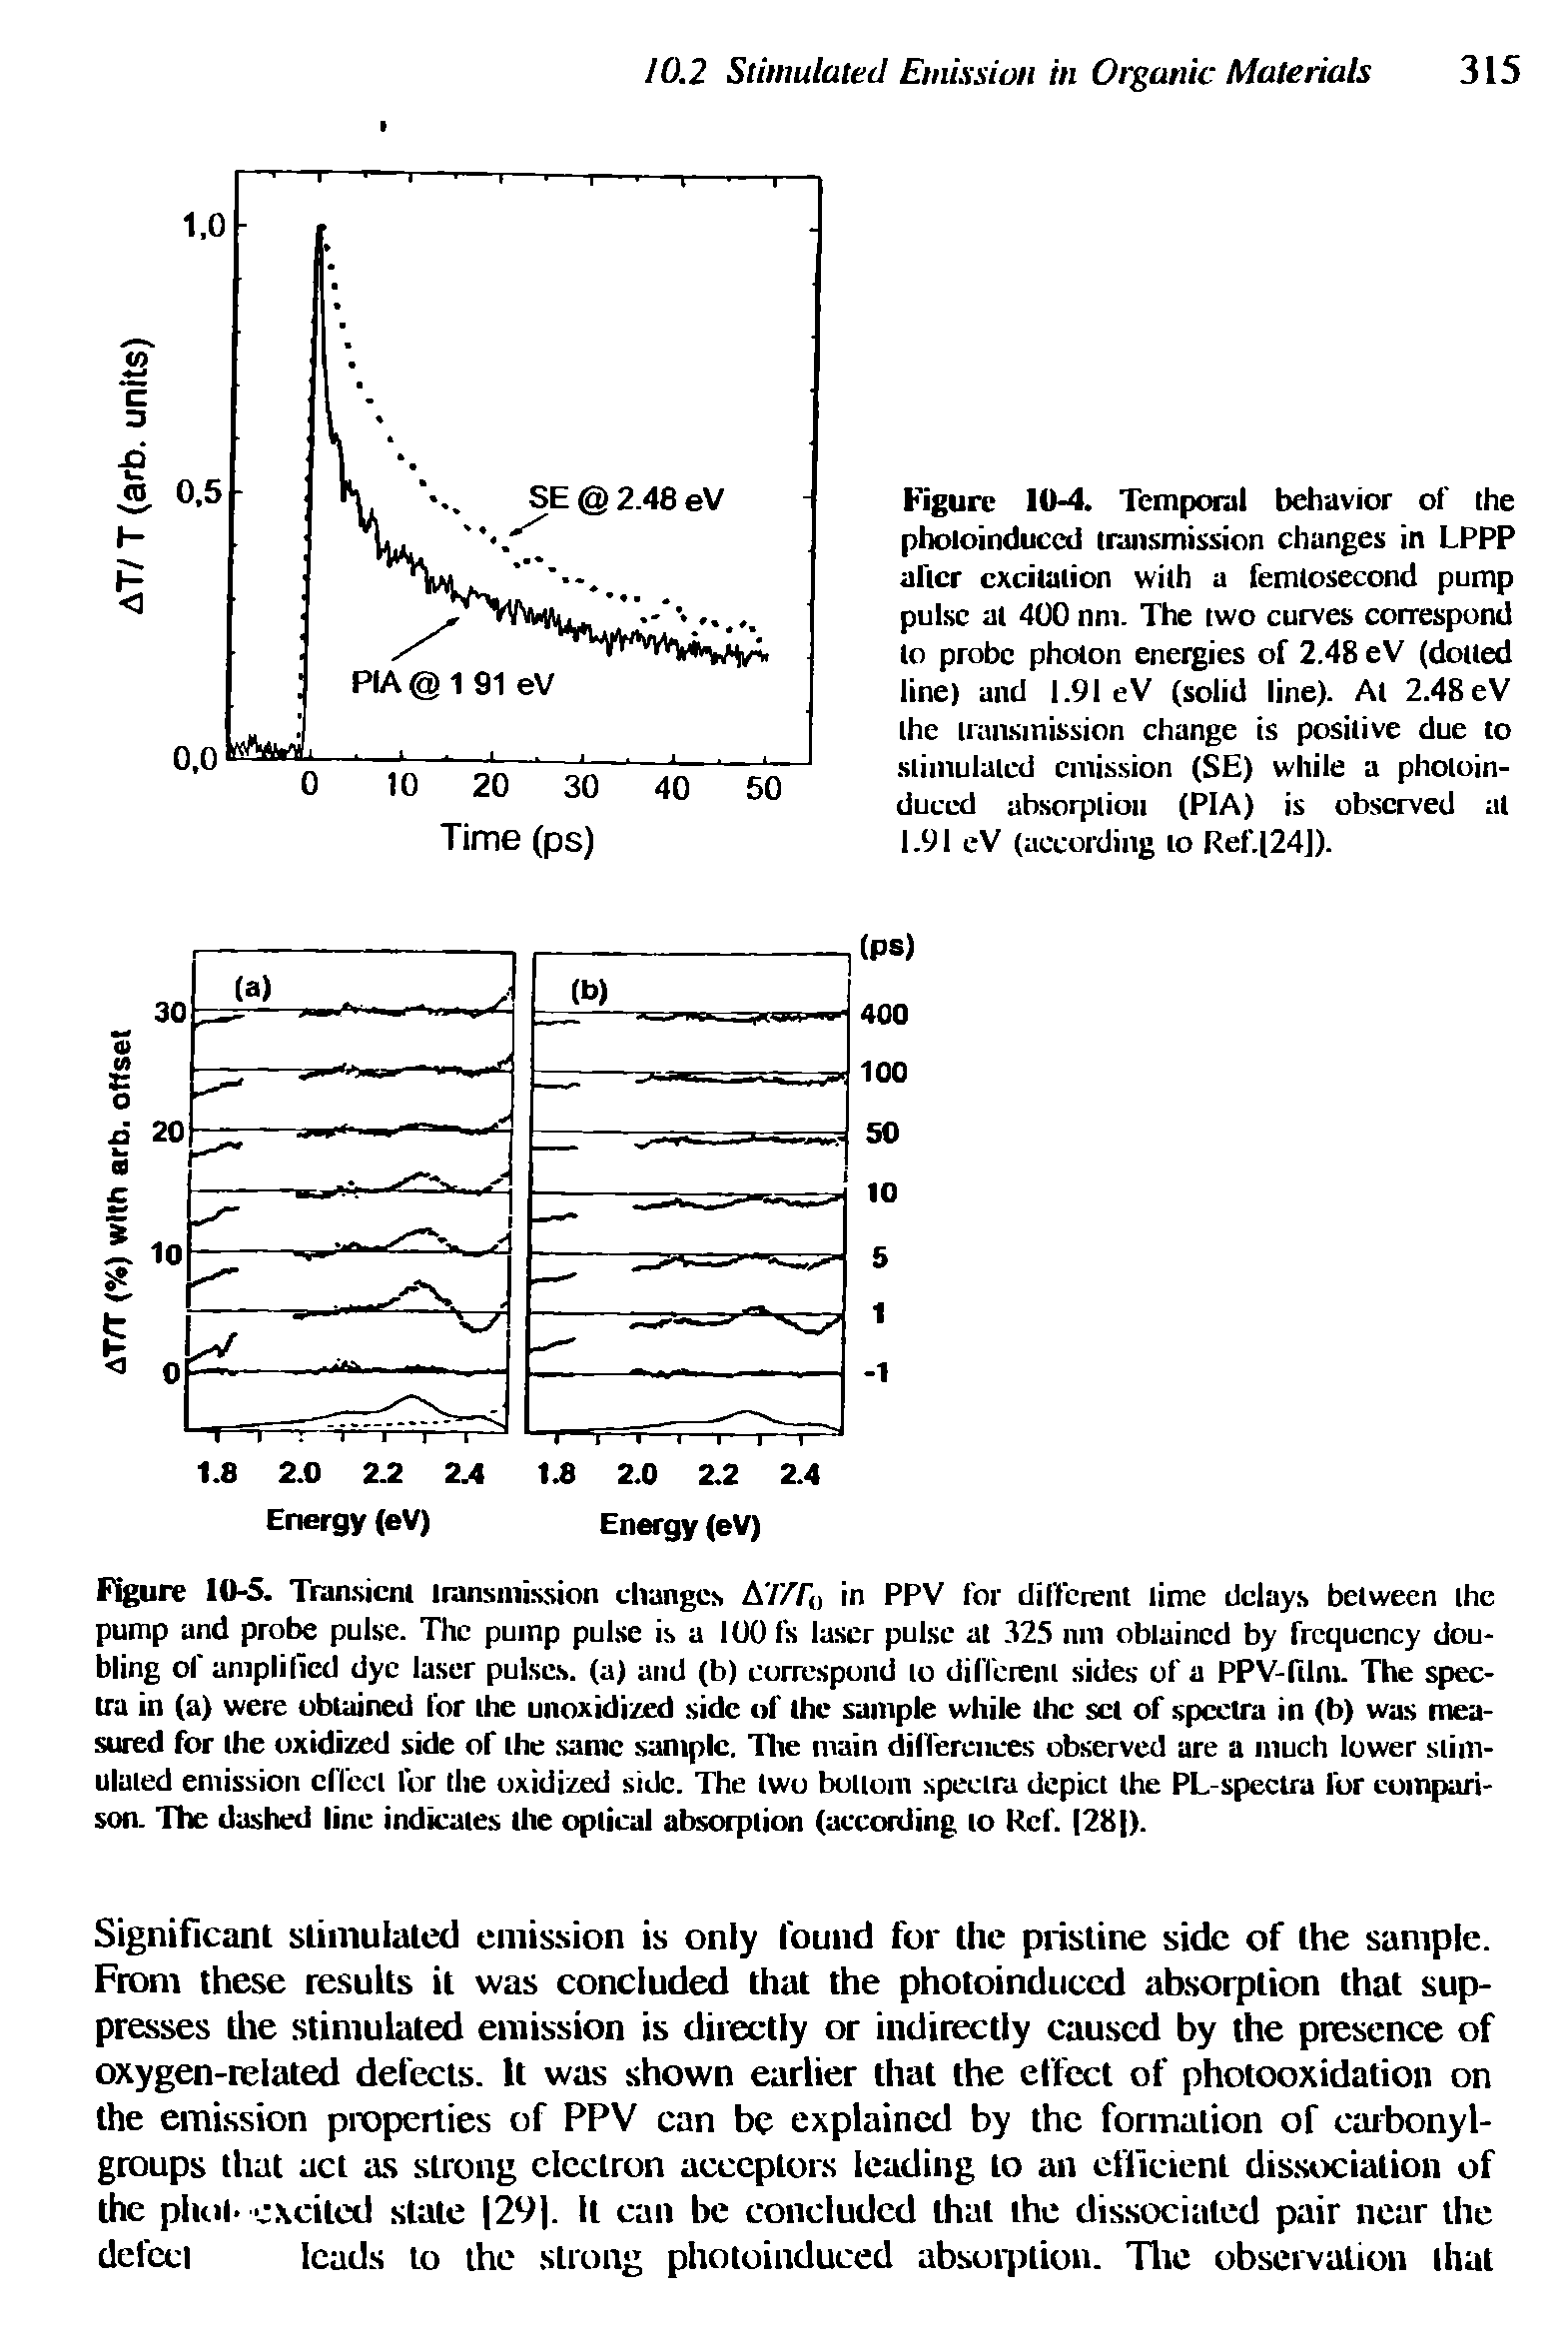 Figure 10-4. Temporal behavior of the pholoinduccd transmission changes in LPPP alter excitation with a femtosecond pump pulse at 400 nnt. The two curves correspond to probe photon eneigies of 2.48 eV (dotted line) and 1.91 eV (solid line). At 2.48 eV the transmission change is positive due to stimulated emission (SE) while a photoin-dueed absorption (PIA) is observed at 1.91 eV (according to Ref.(24J).